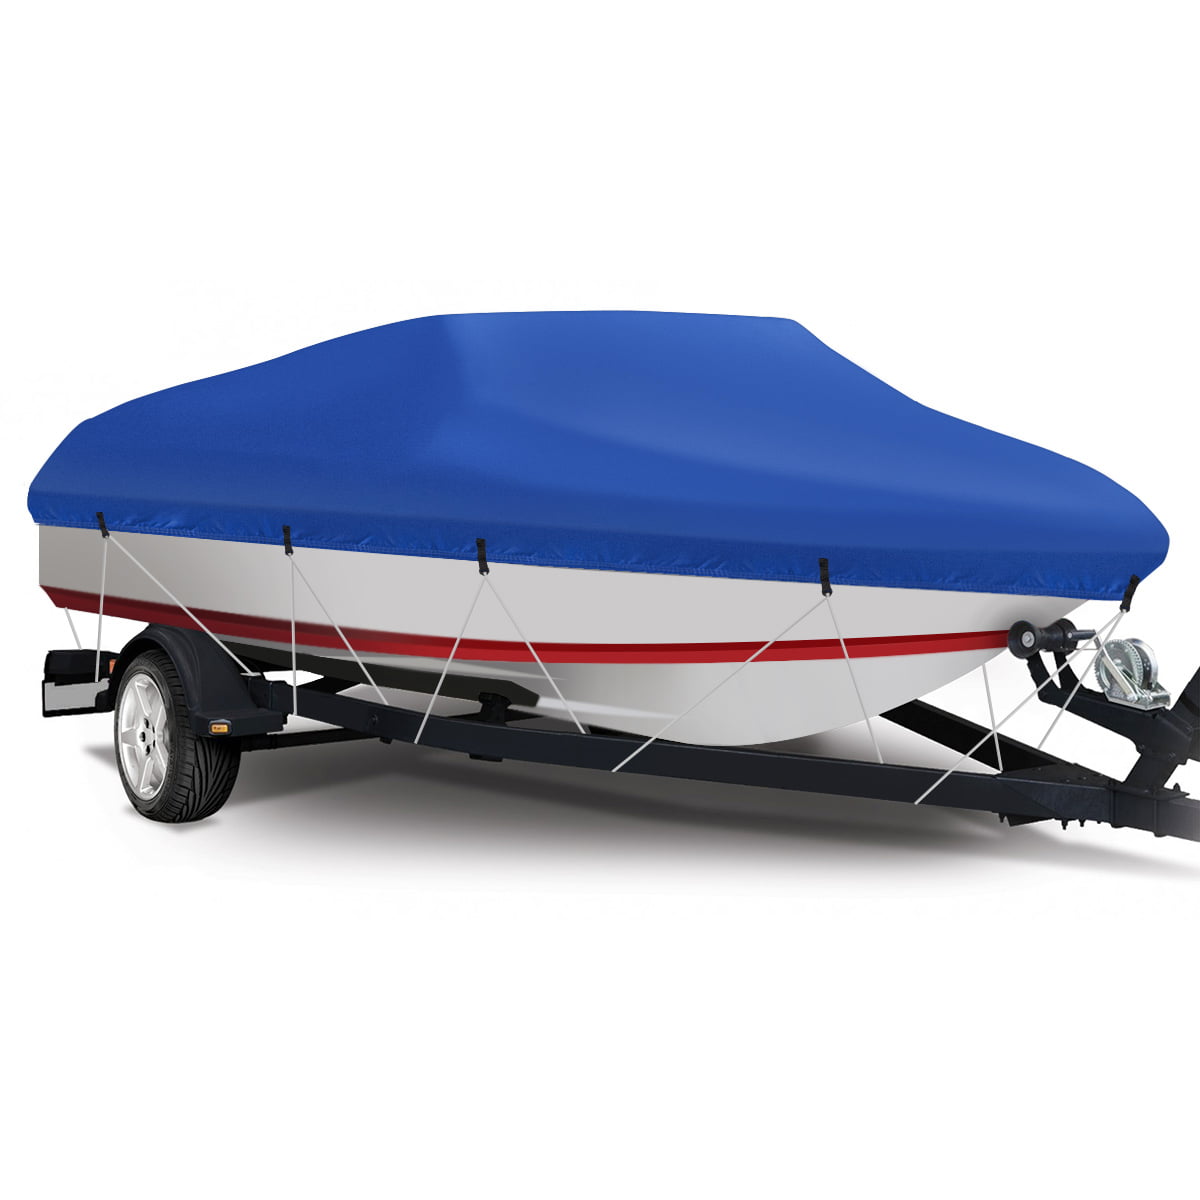 Waterproof Outboard Boat Motor Engine 210D Oxford Cover Set For Up To 